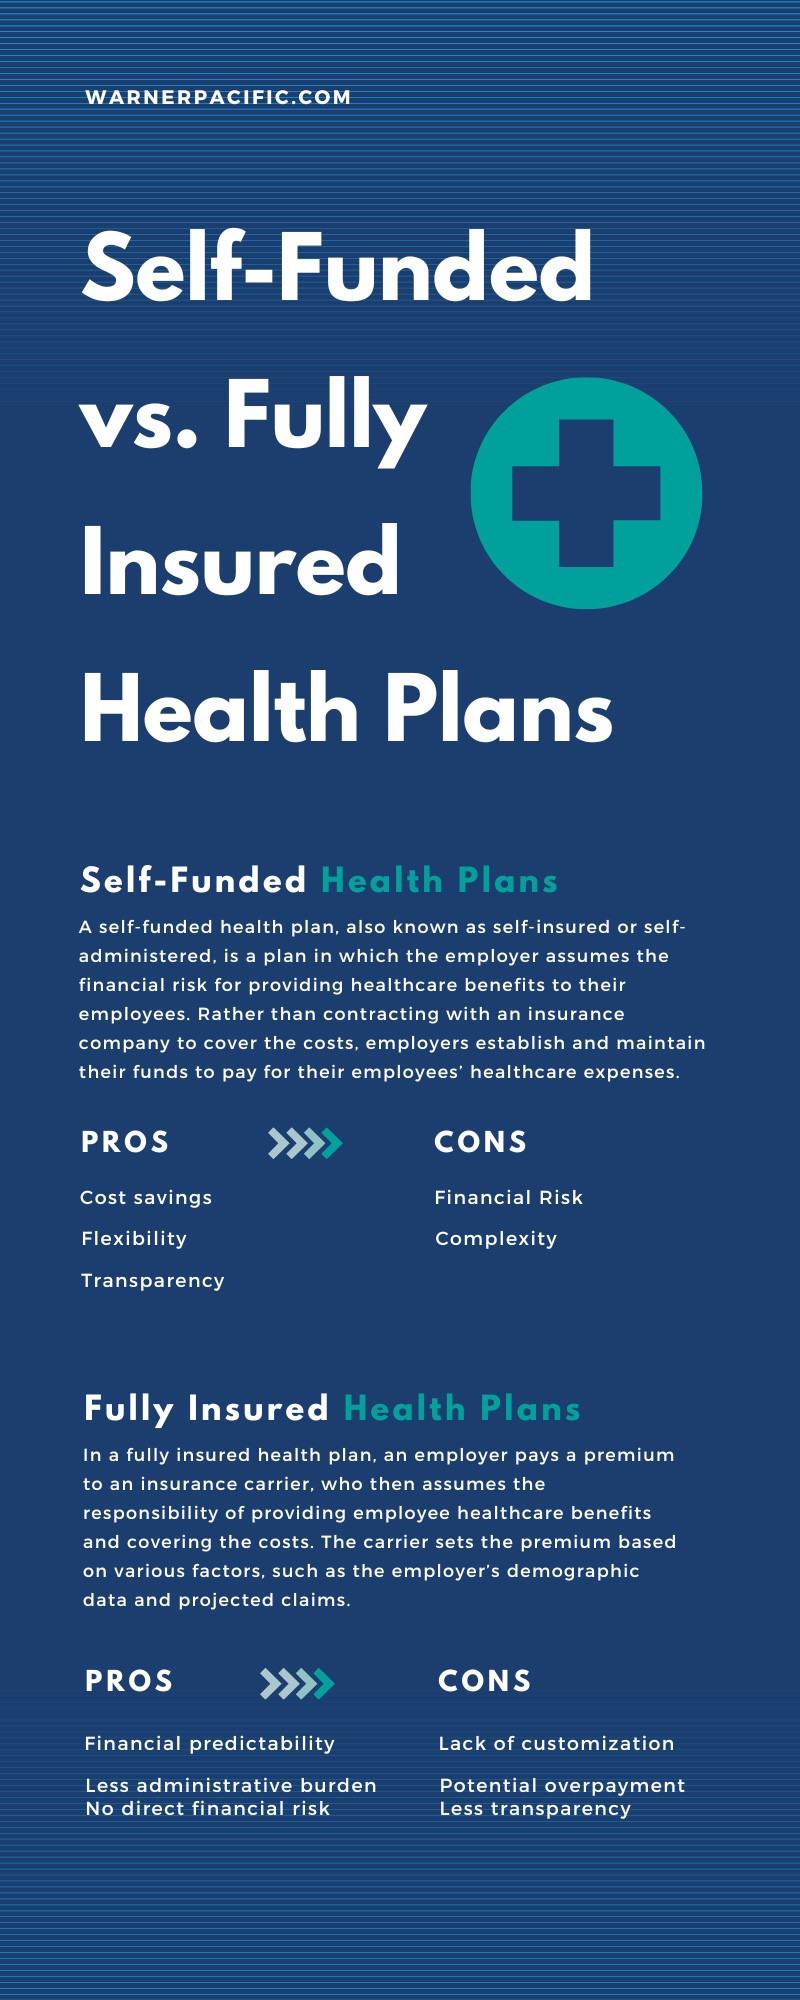 Self-Funded versus Fully Insured Health Plans - An infographic explaining both